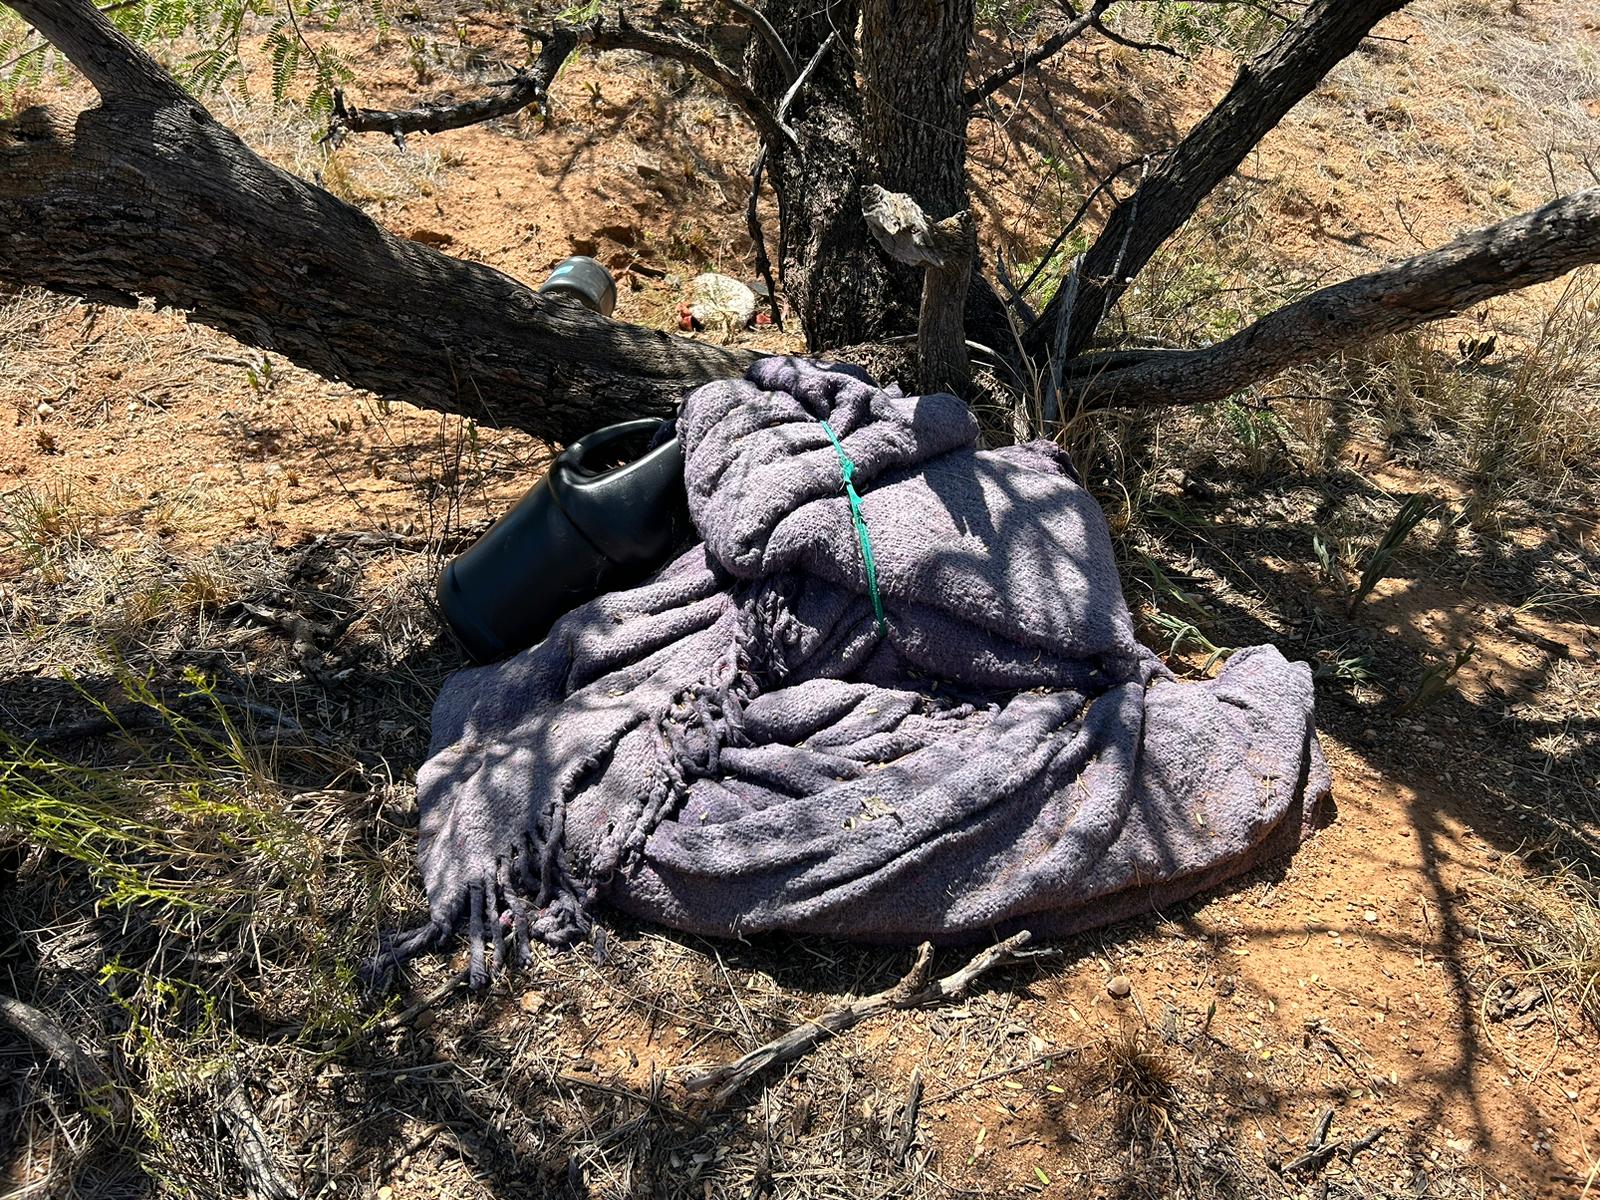 When crossing the Arizona desert from Mexico to the U.S., migrants can die from the sweltering heat. In the image, objects such as a blanket bear witness to the passage of these people fleeing their countries of origin in search of better living conditions for themselves and their families. (Peter Tran) 